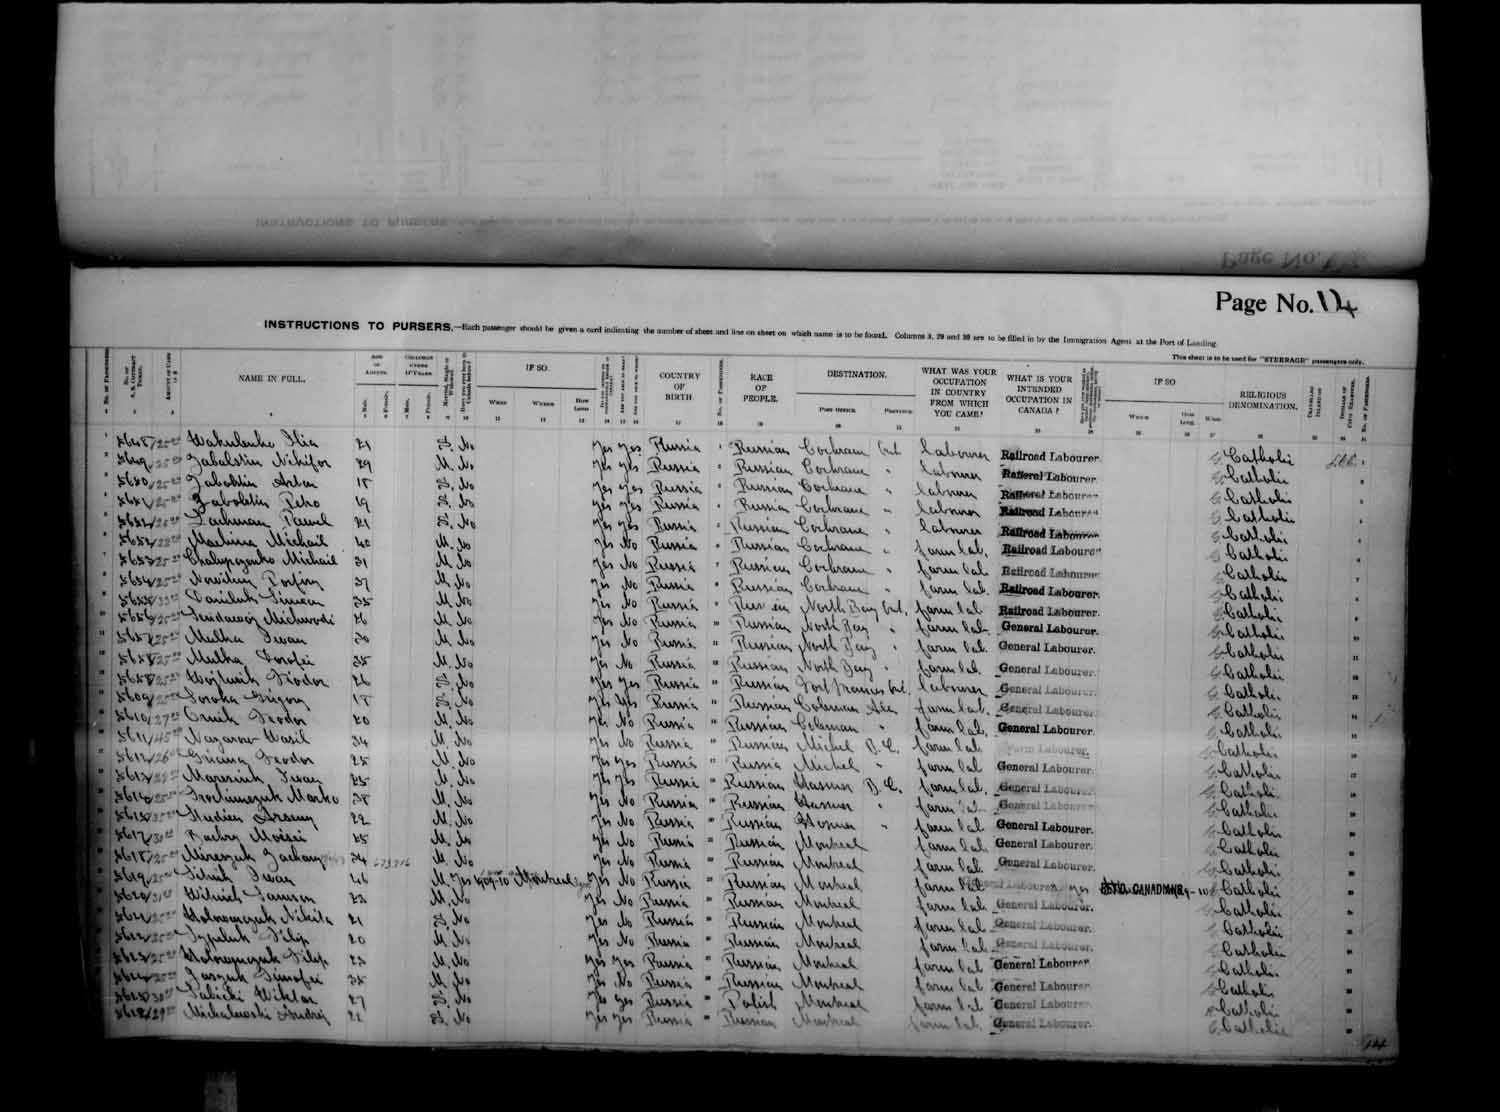 Digitized page of Passenger Lists for Image No.: e003686922